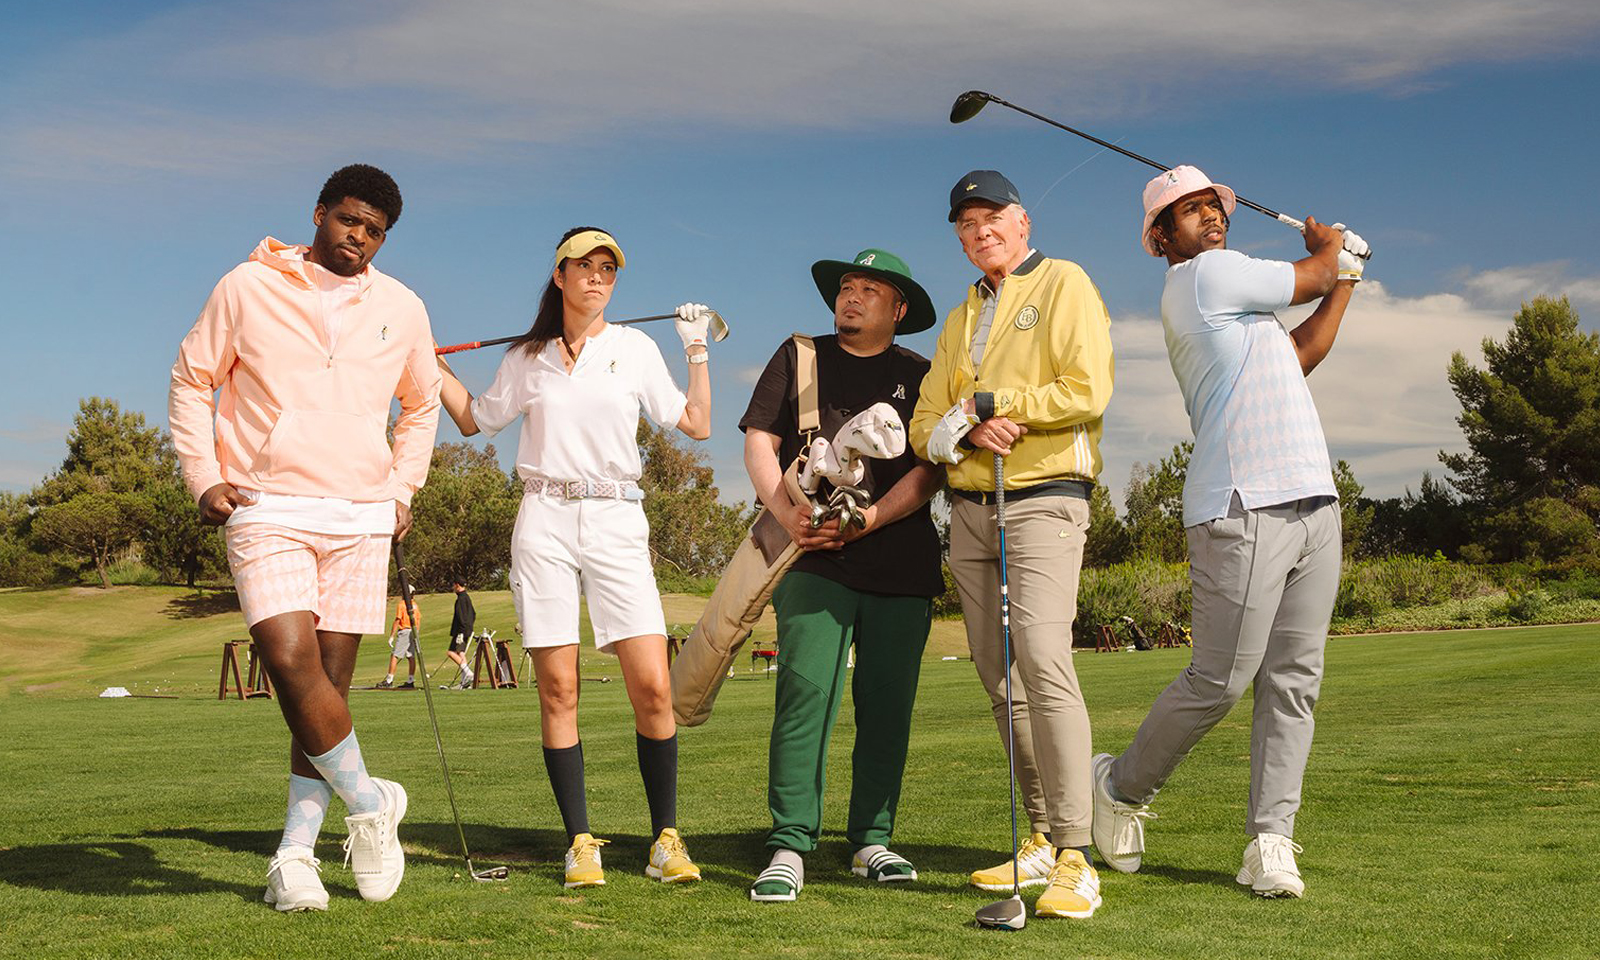 Extra Butter X Adidas: Inspired by 90s Happy Gilmore